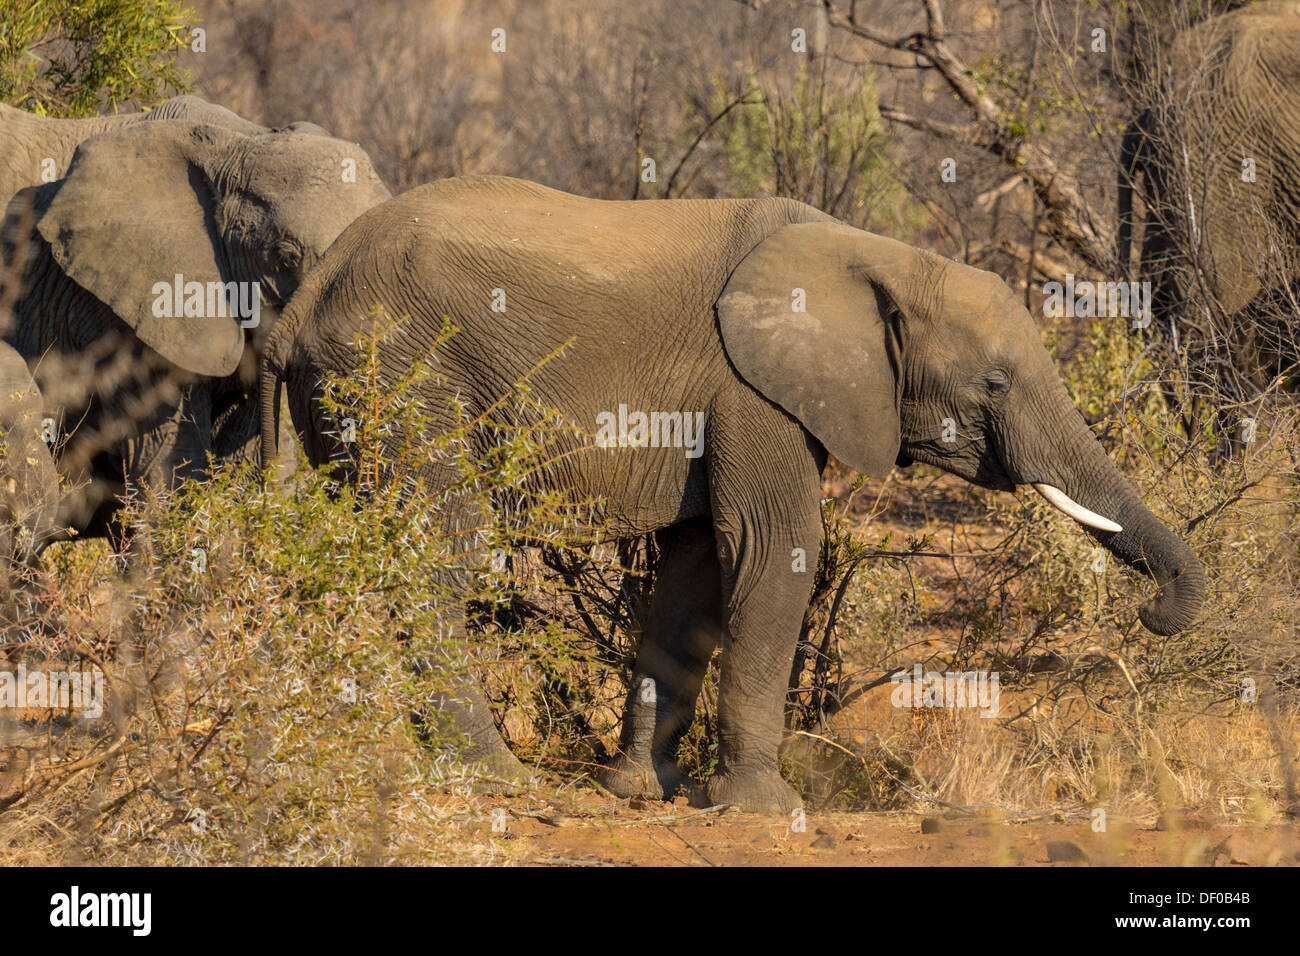 Two elephant wandering in the grasslands of South Africa's Pilanesberg National Park Stock Photo